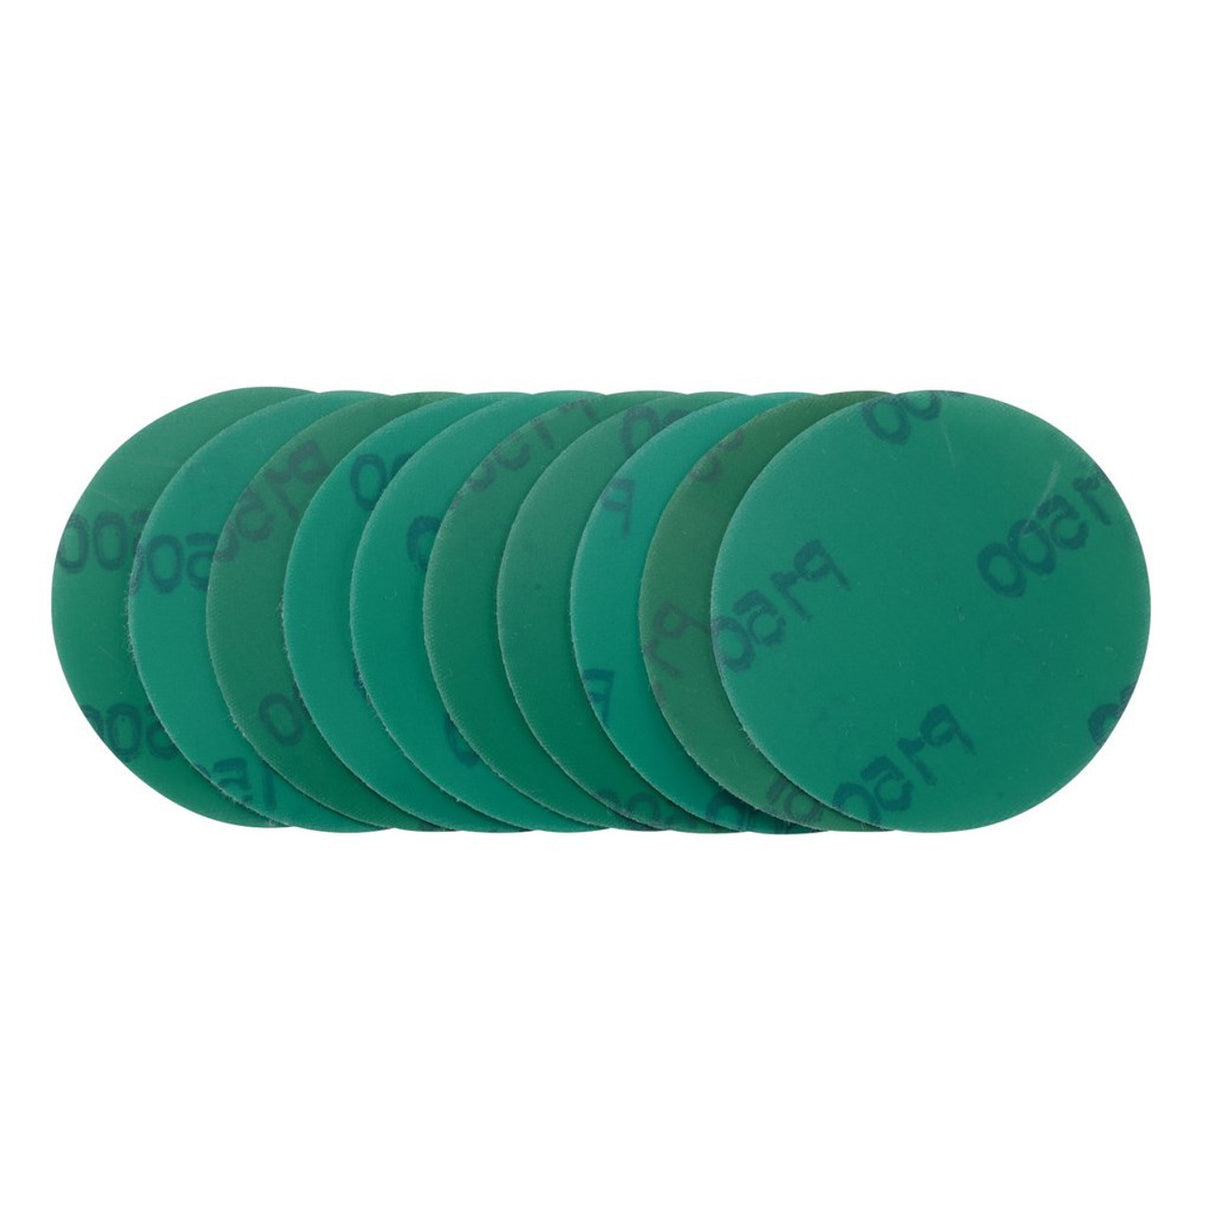 Draper Tools Wet And Dry Sanding Discs With Hook And Loop, 75mm, 1500 Grit (Pack Of 10)